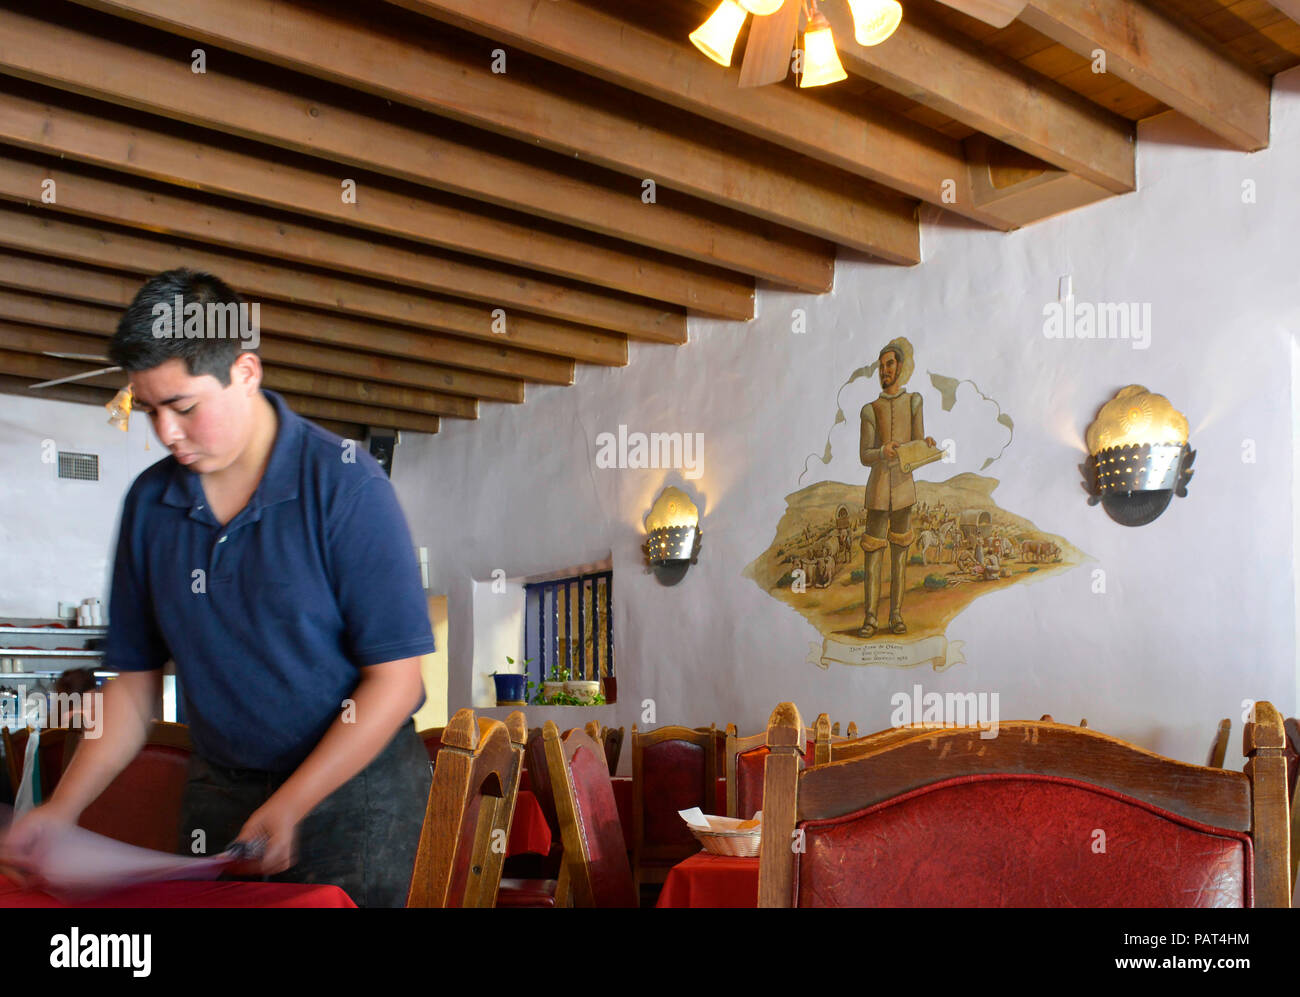 Waiter sets table inside the Oldest restaurant in old town Albuquerque, La Placita, with Spanish settlers honored with frescoes on walls Stock Photo